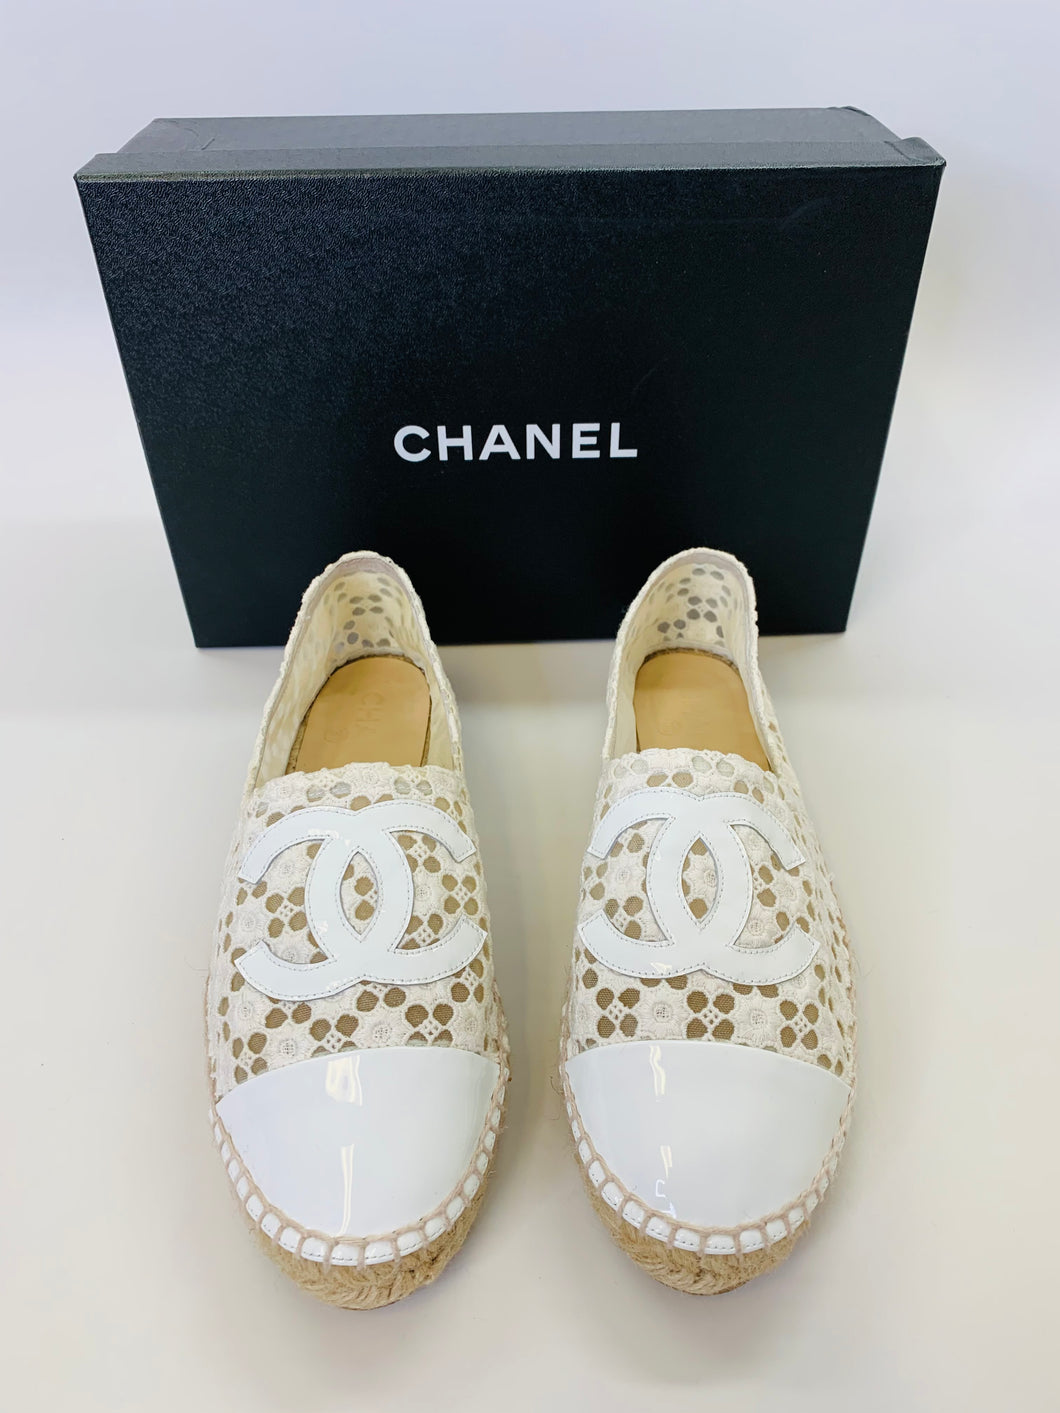 chanel ballet flats shoes for women